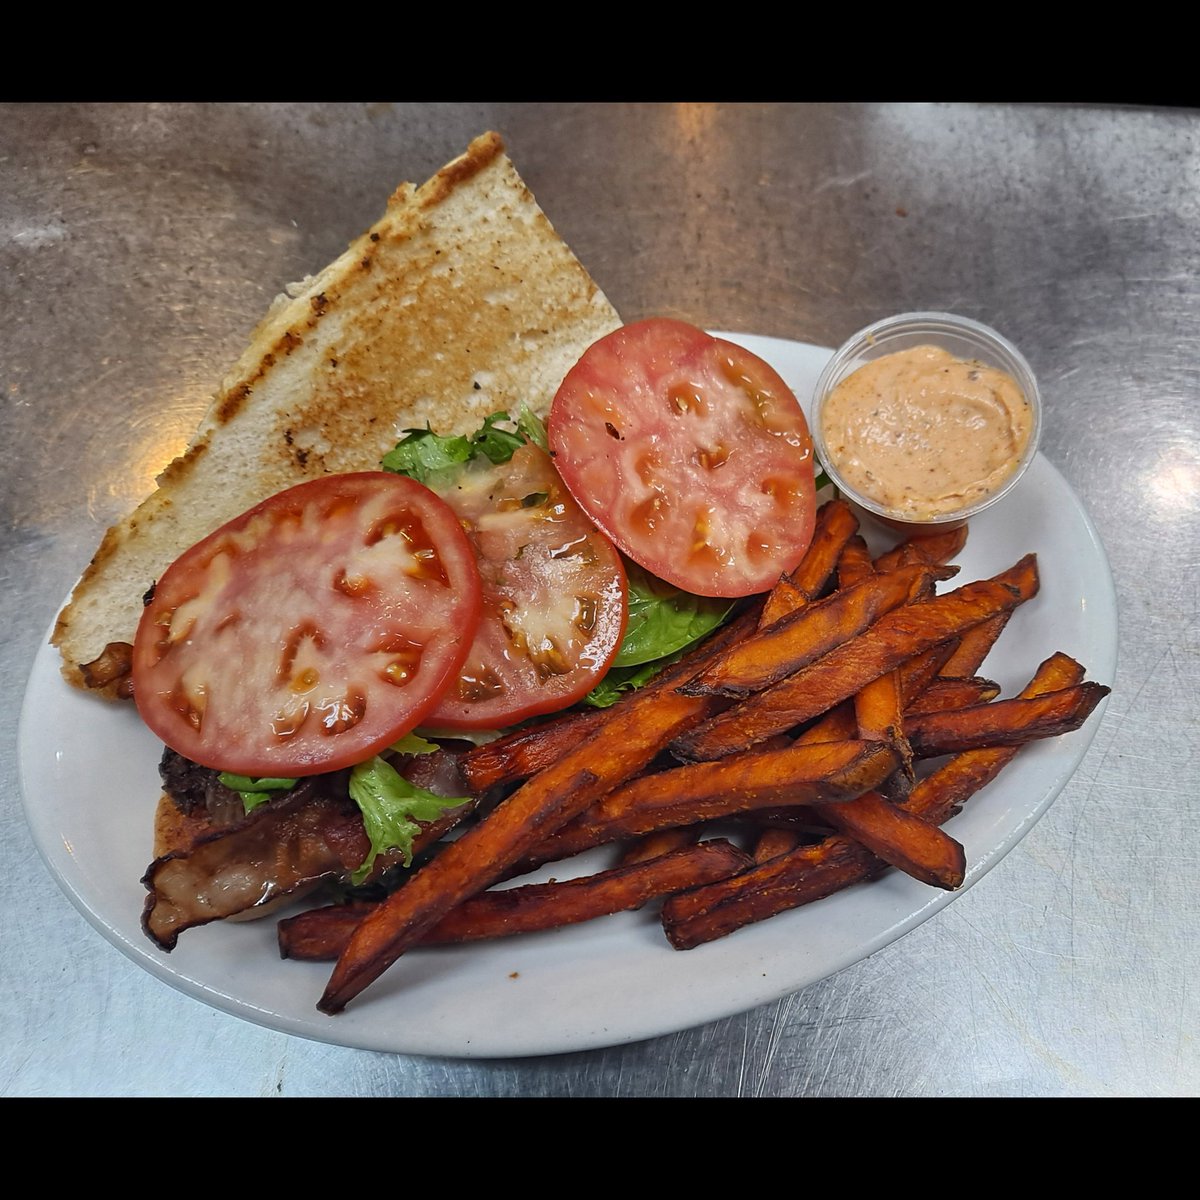 Weekly Food Special - Smoked Beef BLT! House-smoked beef, bacon, mixed greens tossed in our Gose vinaigrette, vine ripened tomato on a toasted bun with our scratch-made remoulade sauce.

#BrewedOnBase #Indianapolis #FtBenIN #WhyILoveLawrence